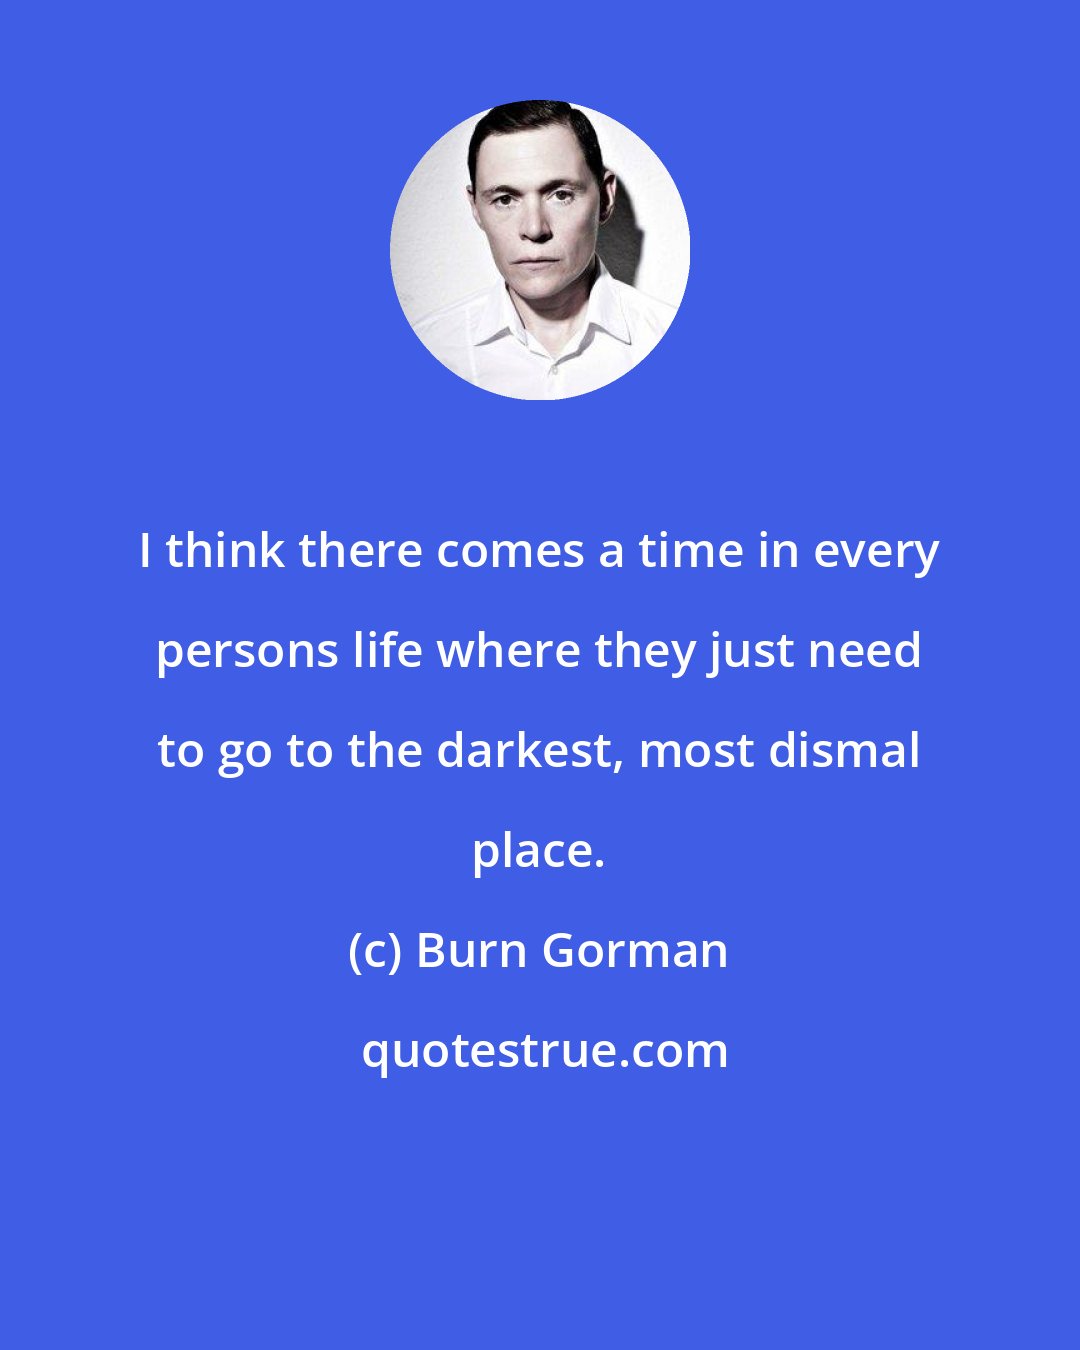 Burn Gorman: I think there comes a time in every persons life where they just need to go to the darkest, most dismal place.